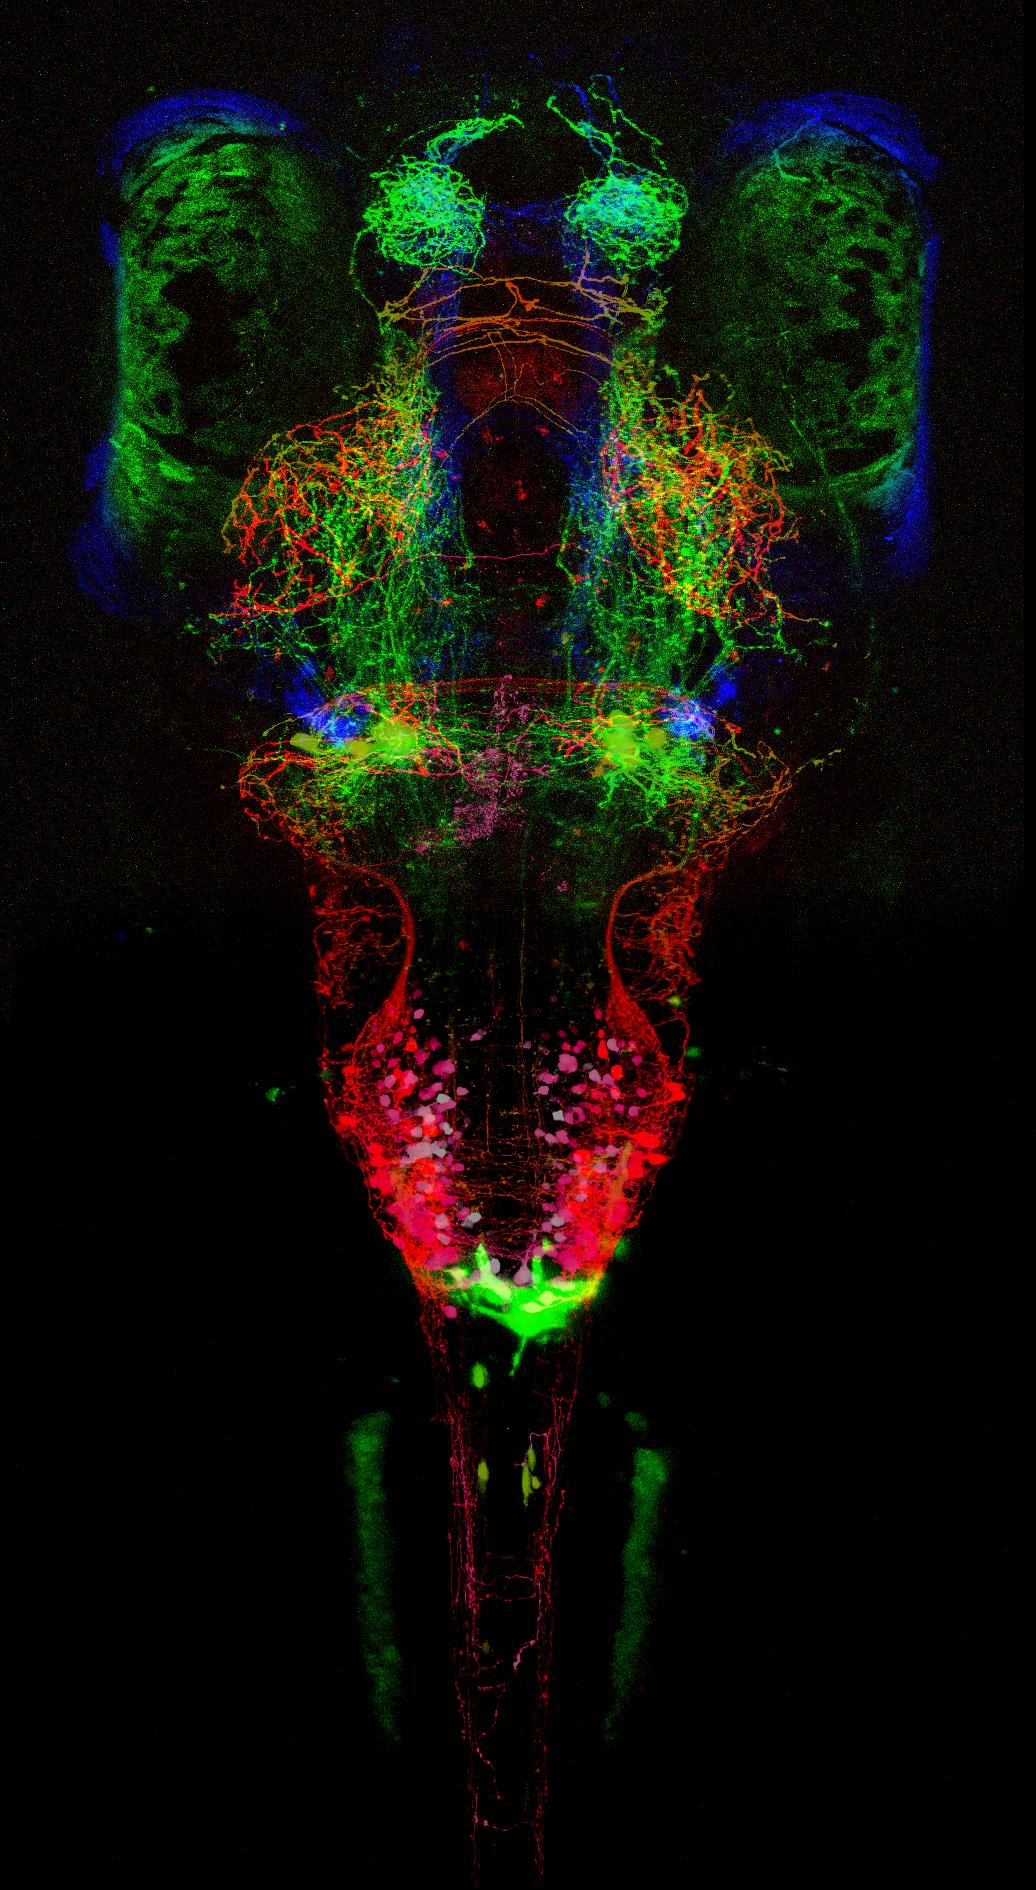 Fluorescent microscopy of many neurons and their processes, labeled in red, green, and blue, across the body of a larval zebrafish.